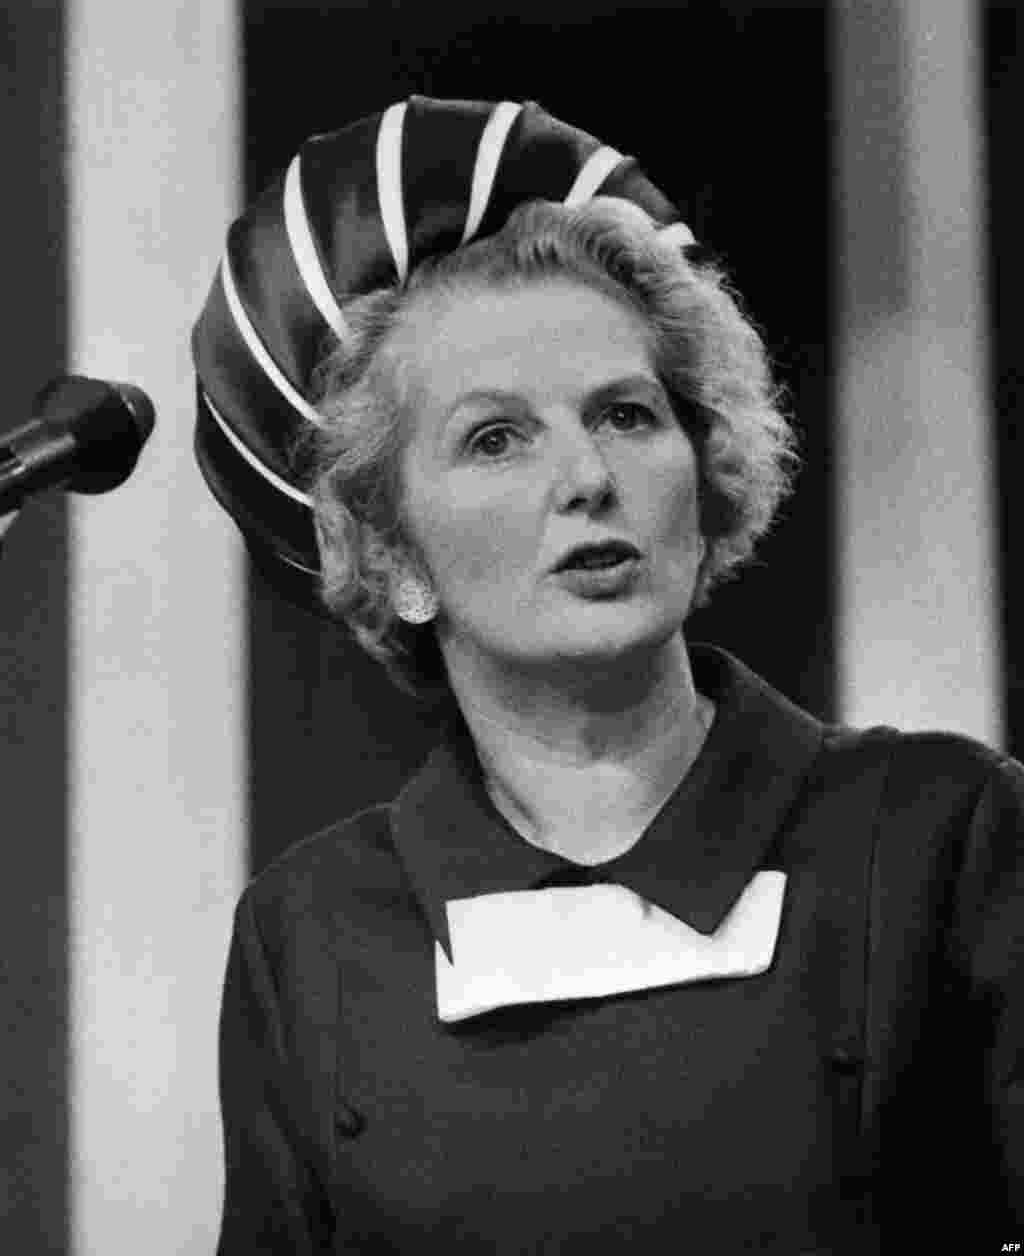 Margaret Thatcher shown in October 1970, when she was secretary of state for education and science in the government of Edward Heath